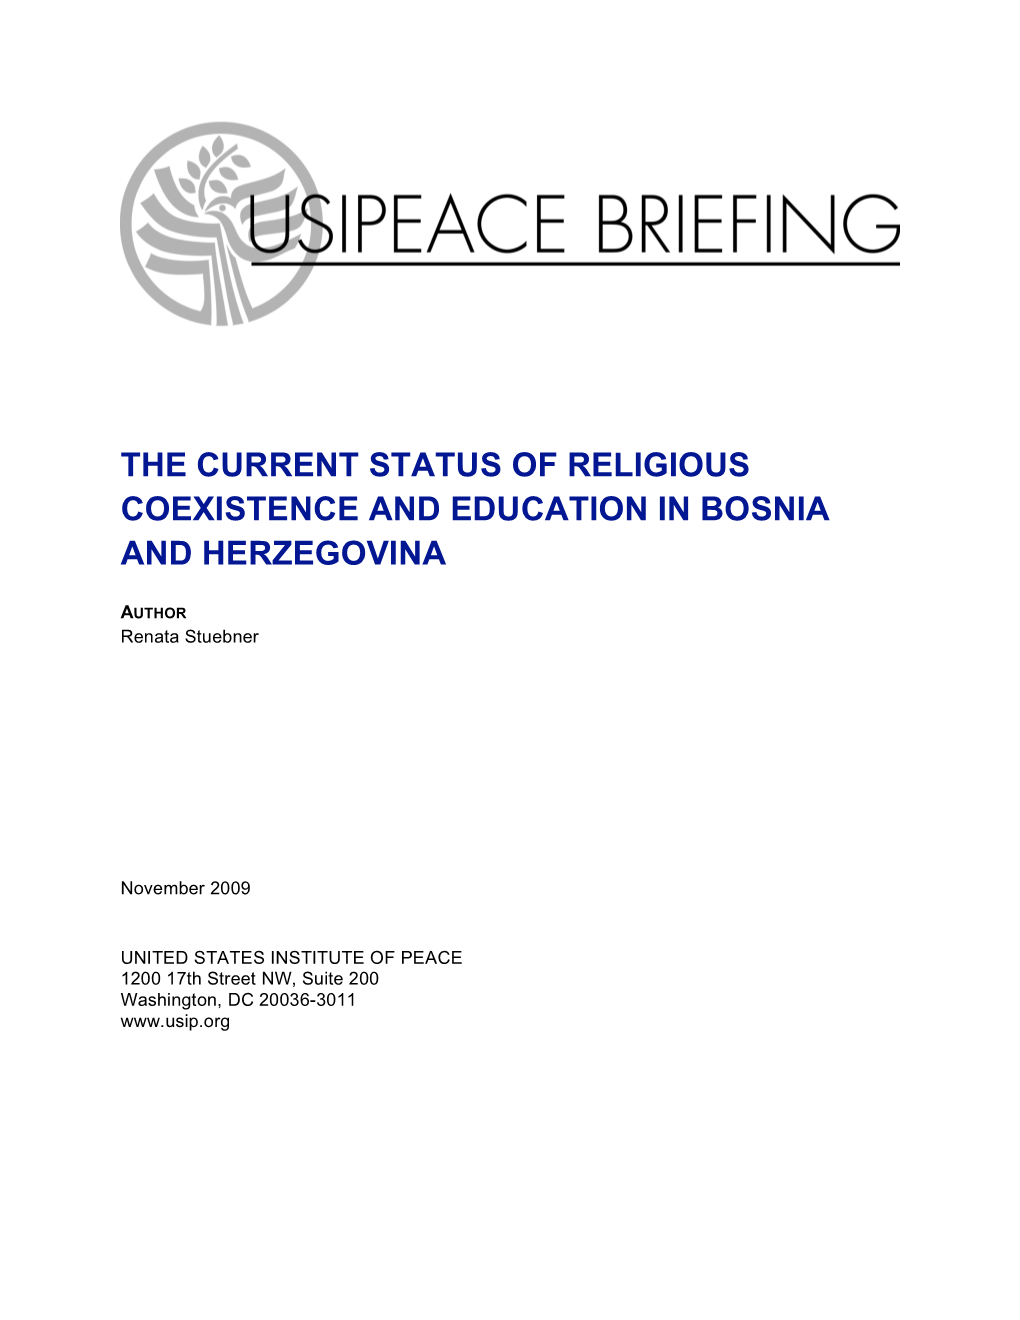 The Current Status of Religious Coexistence and Education in Bosnia